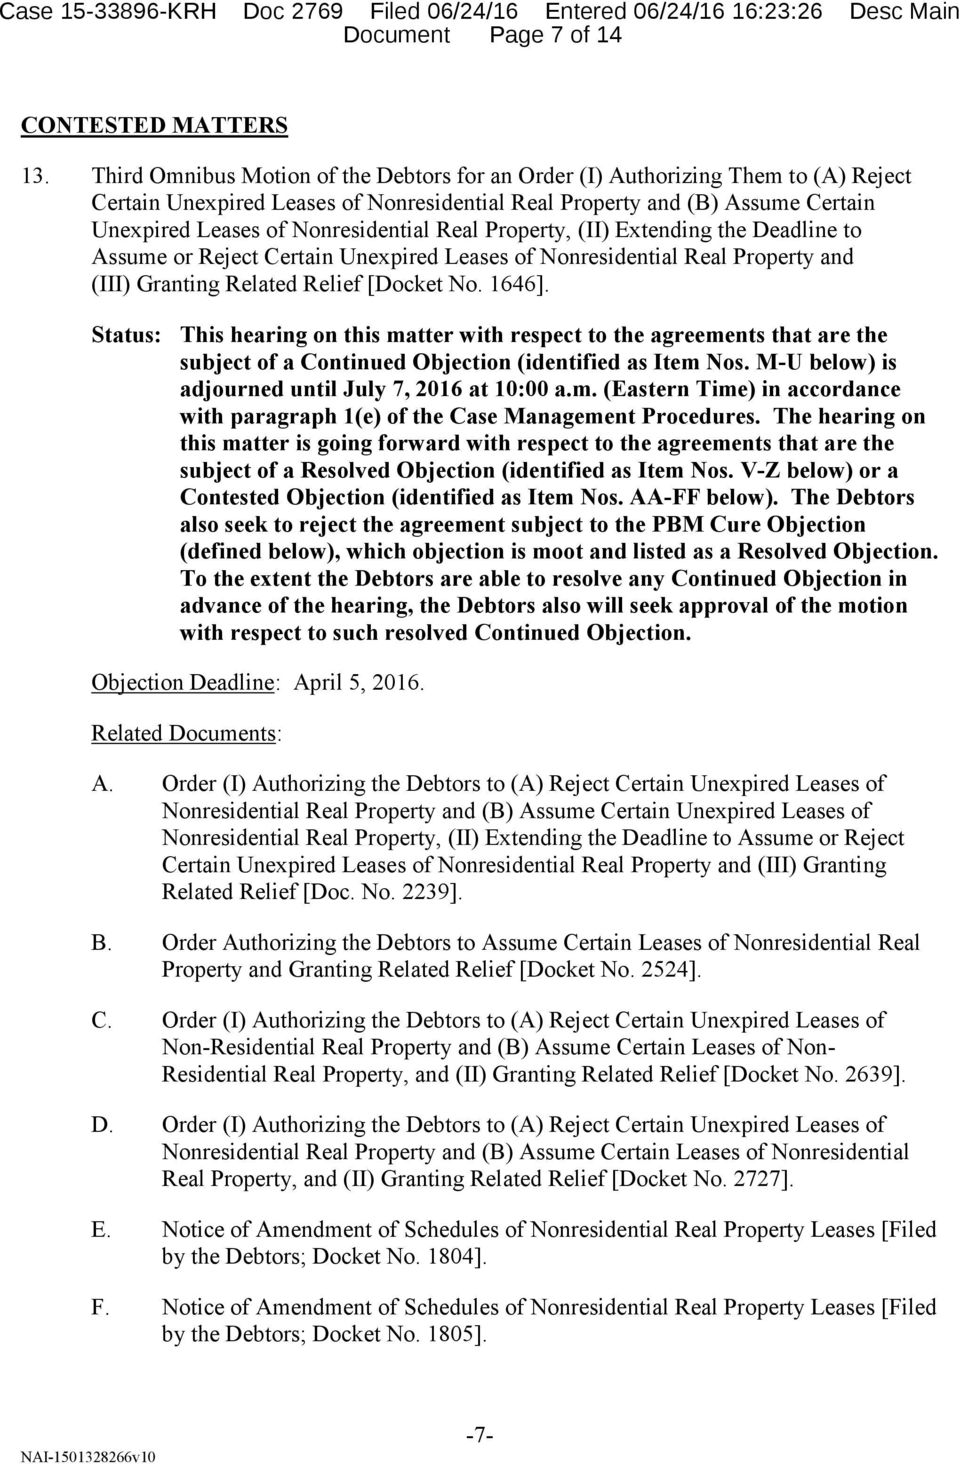 Real Property, (II) Extending the Deadline to Assume or Reject Certain Unexpired Leases of Nonresidential Real Property and (III) Granting Related Relief [Docket No. 1646].